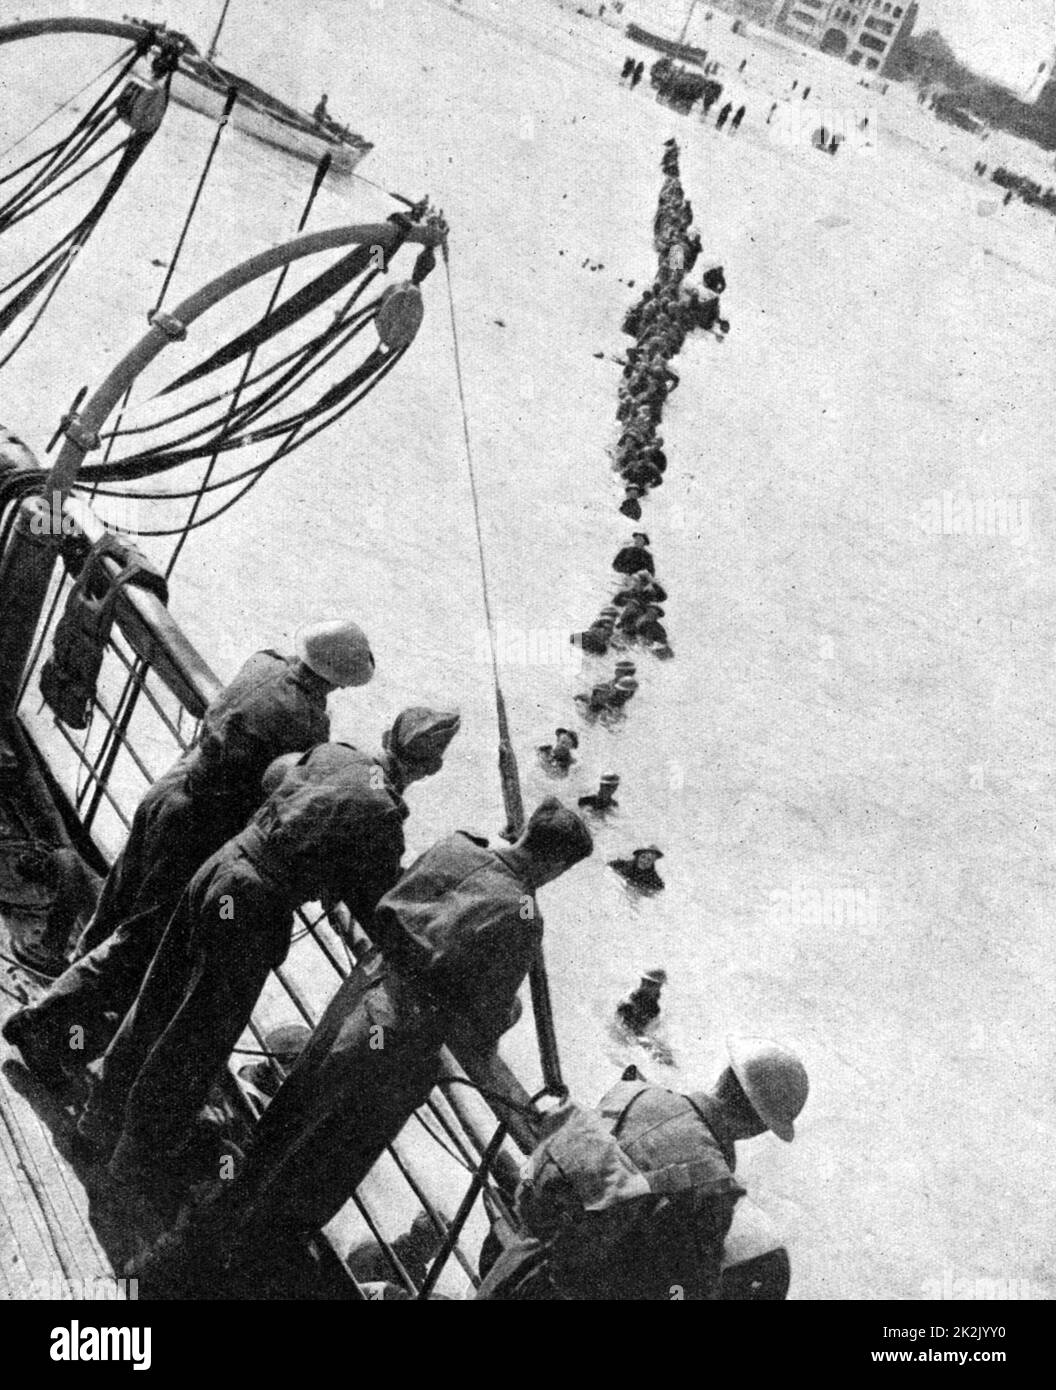 Evacuation of French, Belgian and British troops from Dunkirk, 27 May to 3 June 1940: Men wading out to board a warship. This Operation Dynamo evacuated 338,226 soldiers,  139,997 of the French Stock Photo